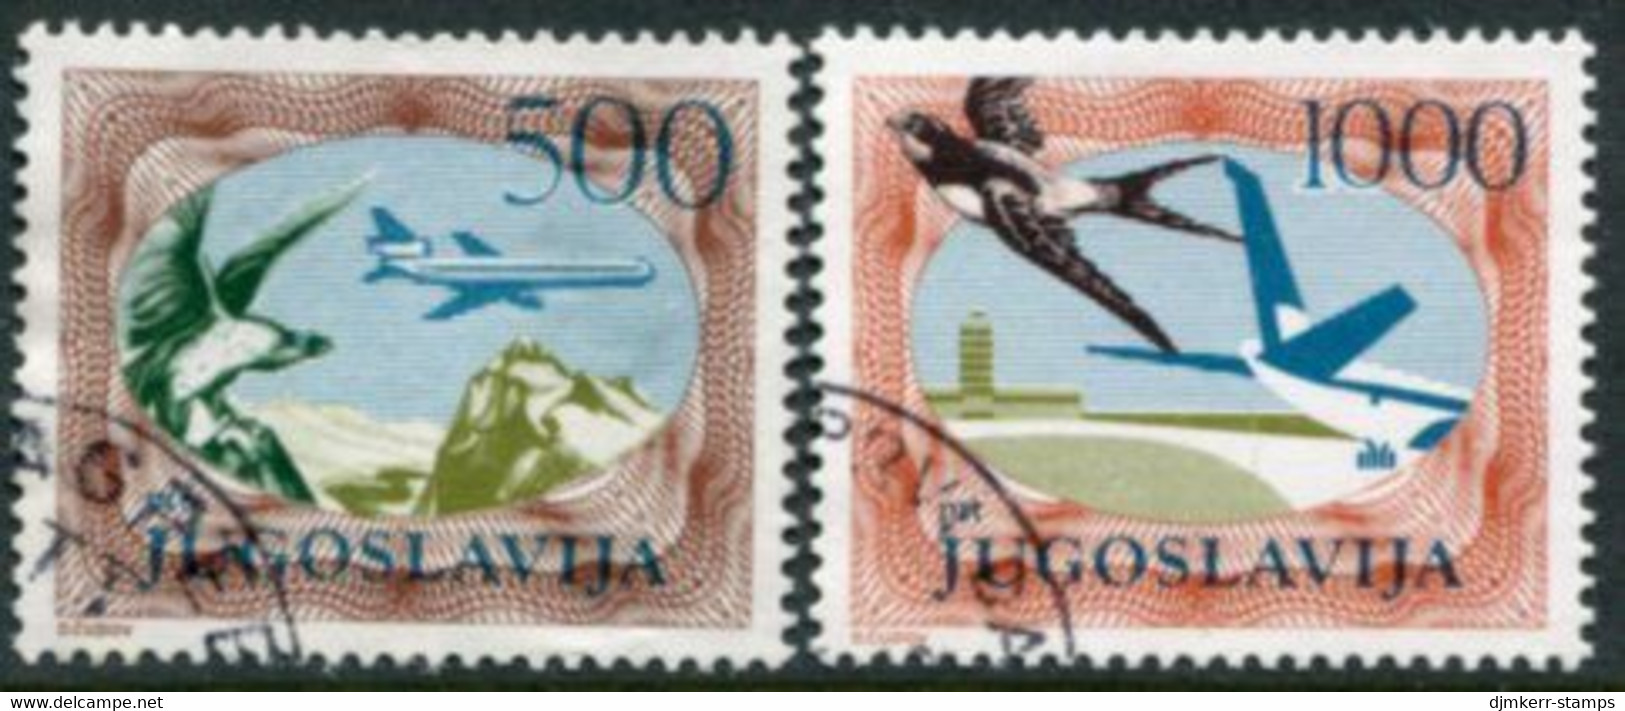 YUGOSLAVIA 1985 Airmail Definitive Perforated 12½ Used.  Michel 2098-99A - Gebraucht